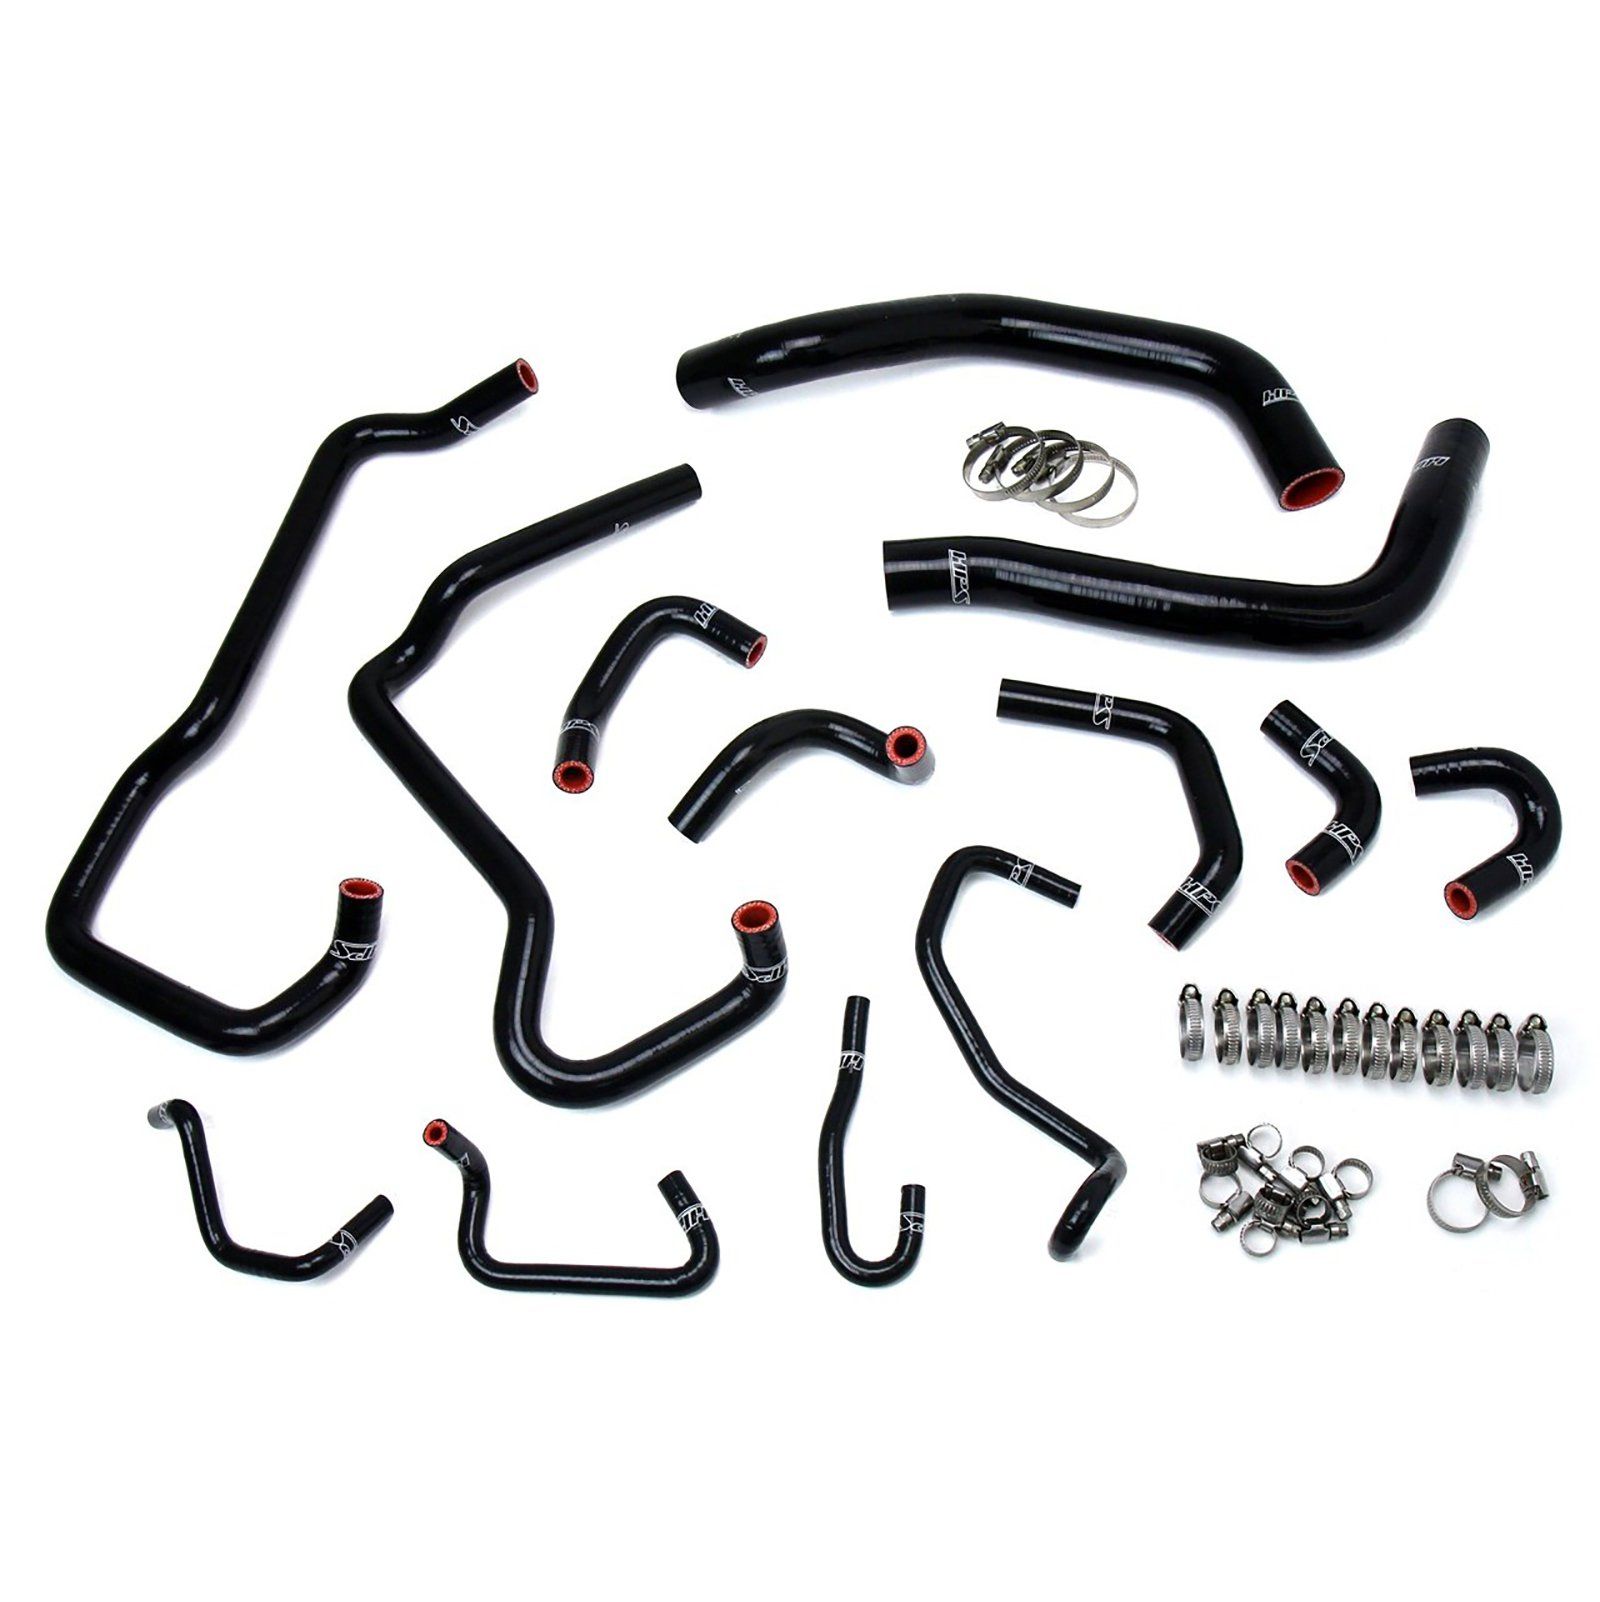 '16-17 Toyota Tacoma Reinforced Silicone Hose Kit Performance Products HPS Performance parts